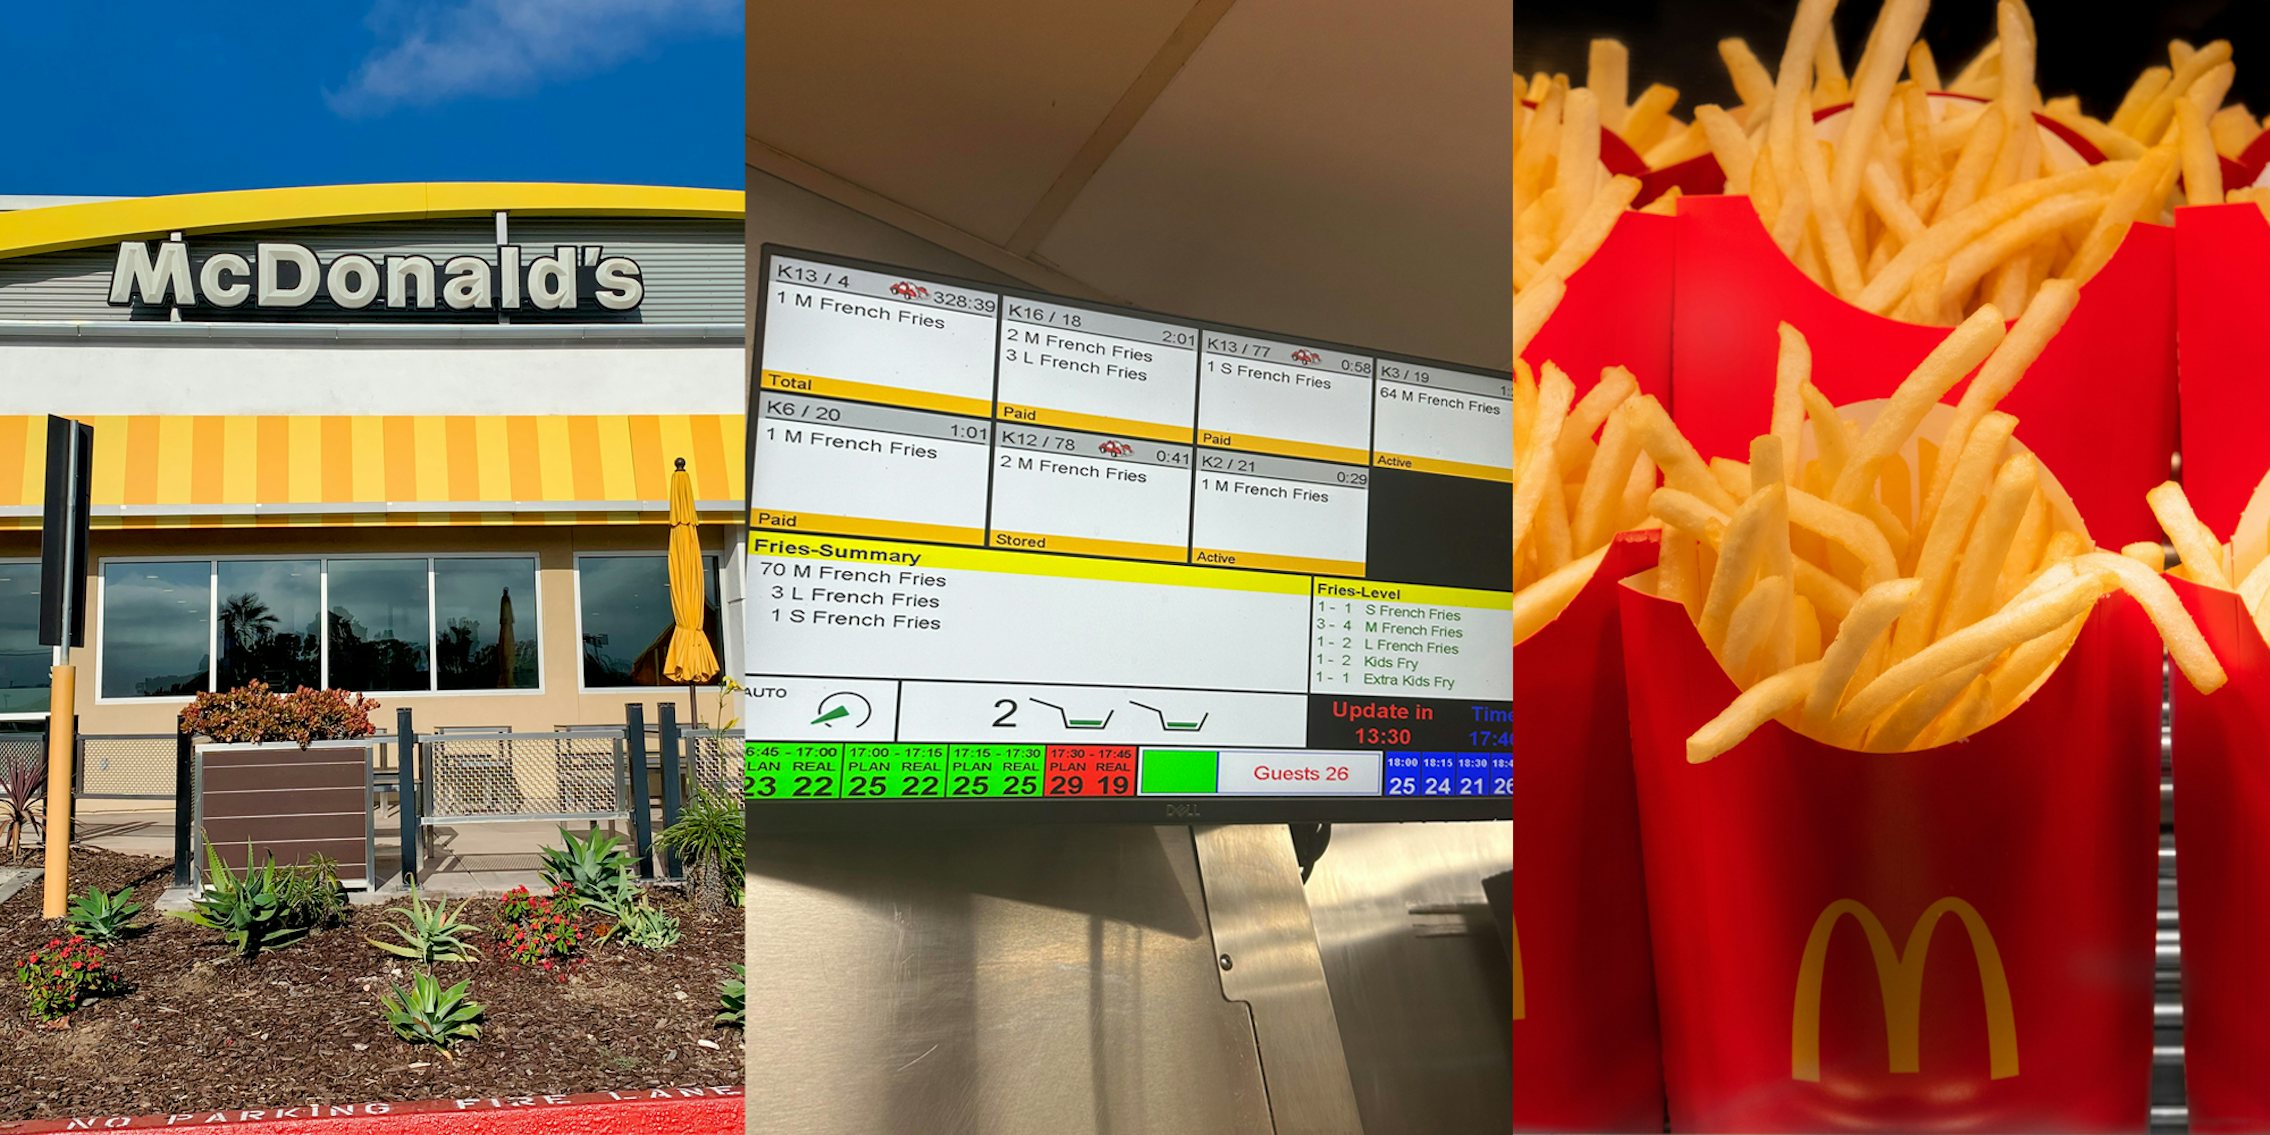 McDonald's building with sign (l) McDonald's order screen displaying 70 orders of fries (c) McDonald's french fries in front of black background (r)